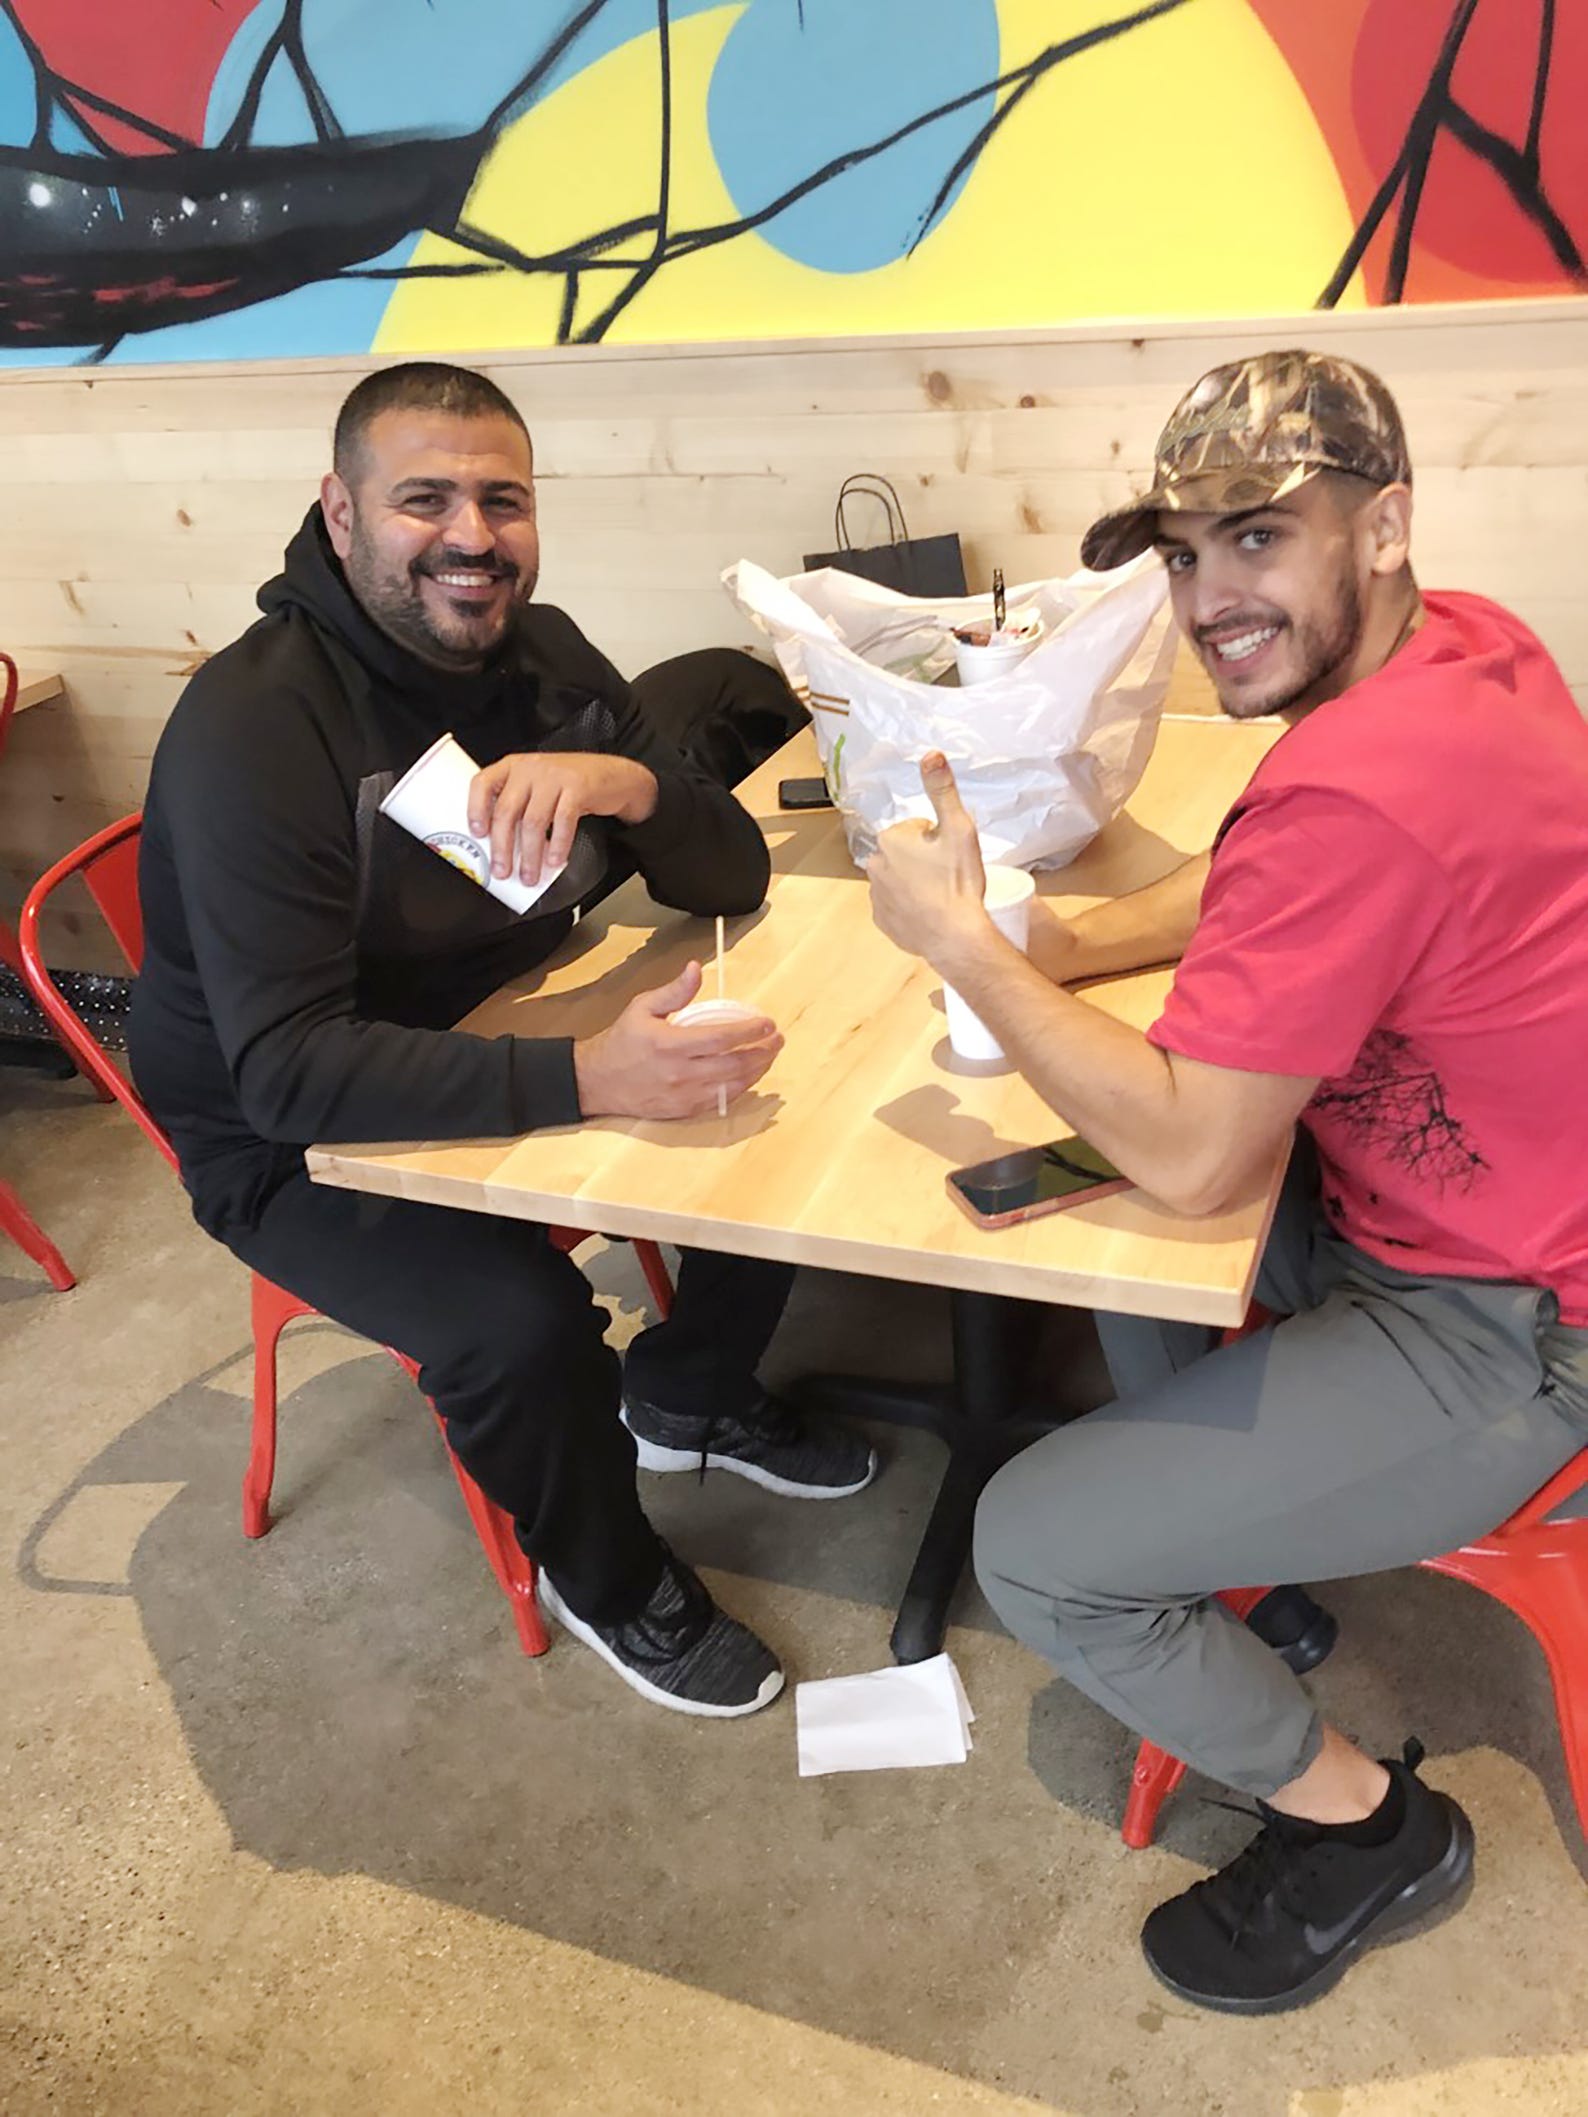 Fadi Naji (L) and Hussein Naji (R) enjoyed the chicken at the new Dave's Hot Chicken in Dearborn.